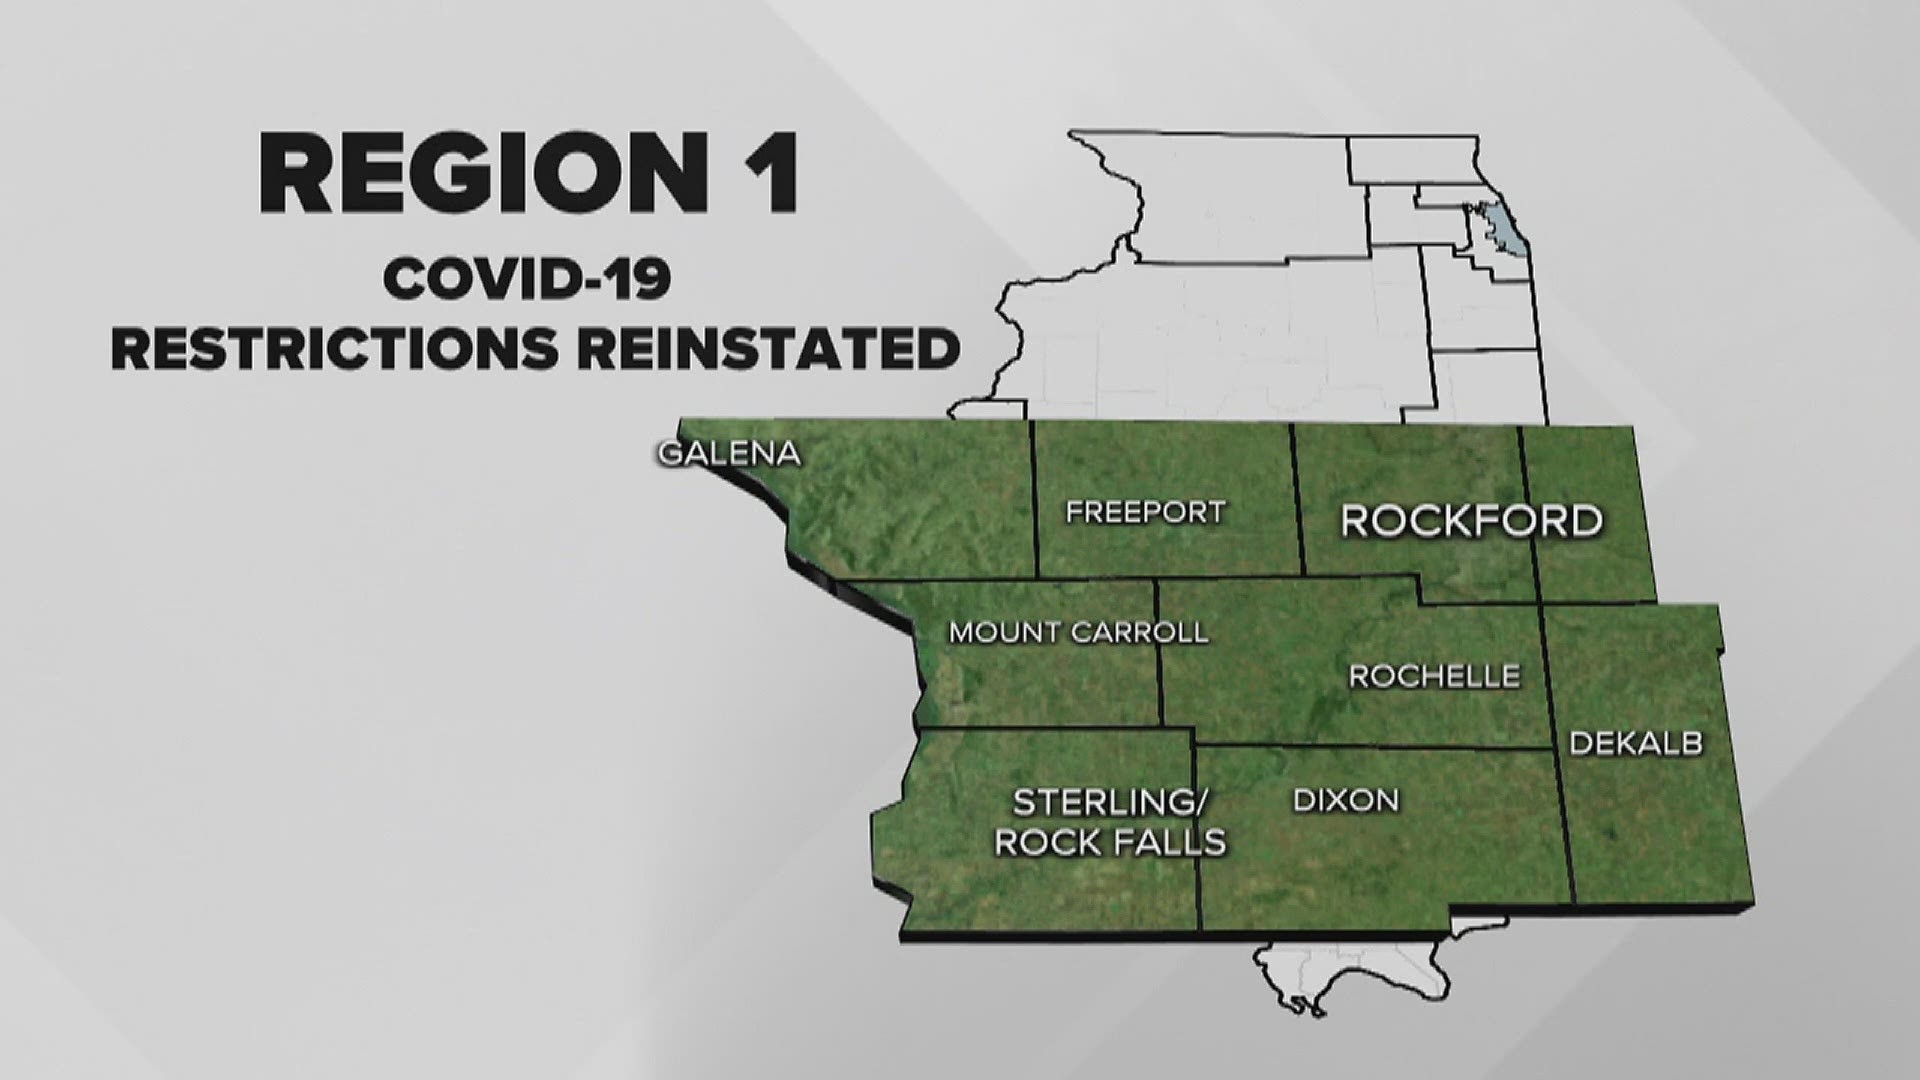 Starting Saturday, October 3, stricter mitigations to help curb COVID-19 will be put in place in Region 1.